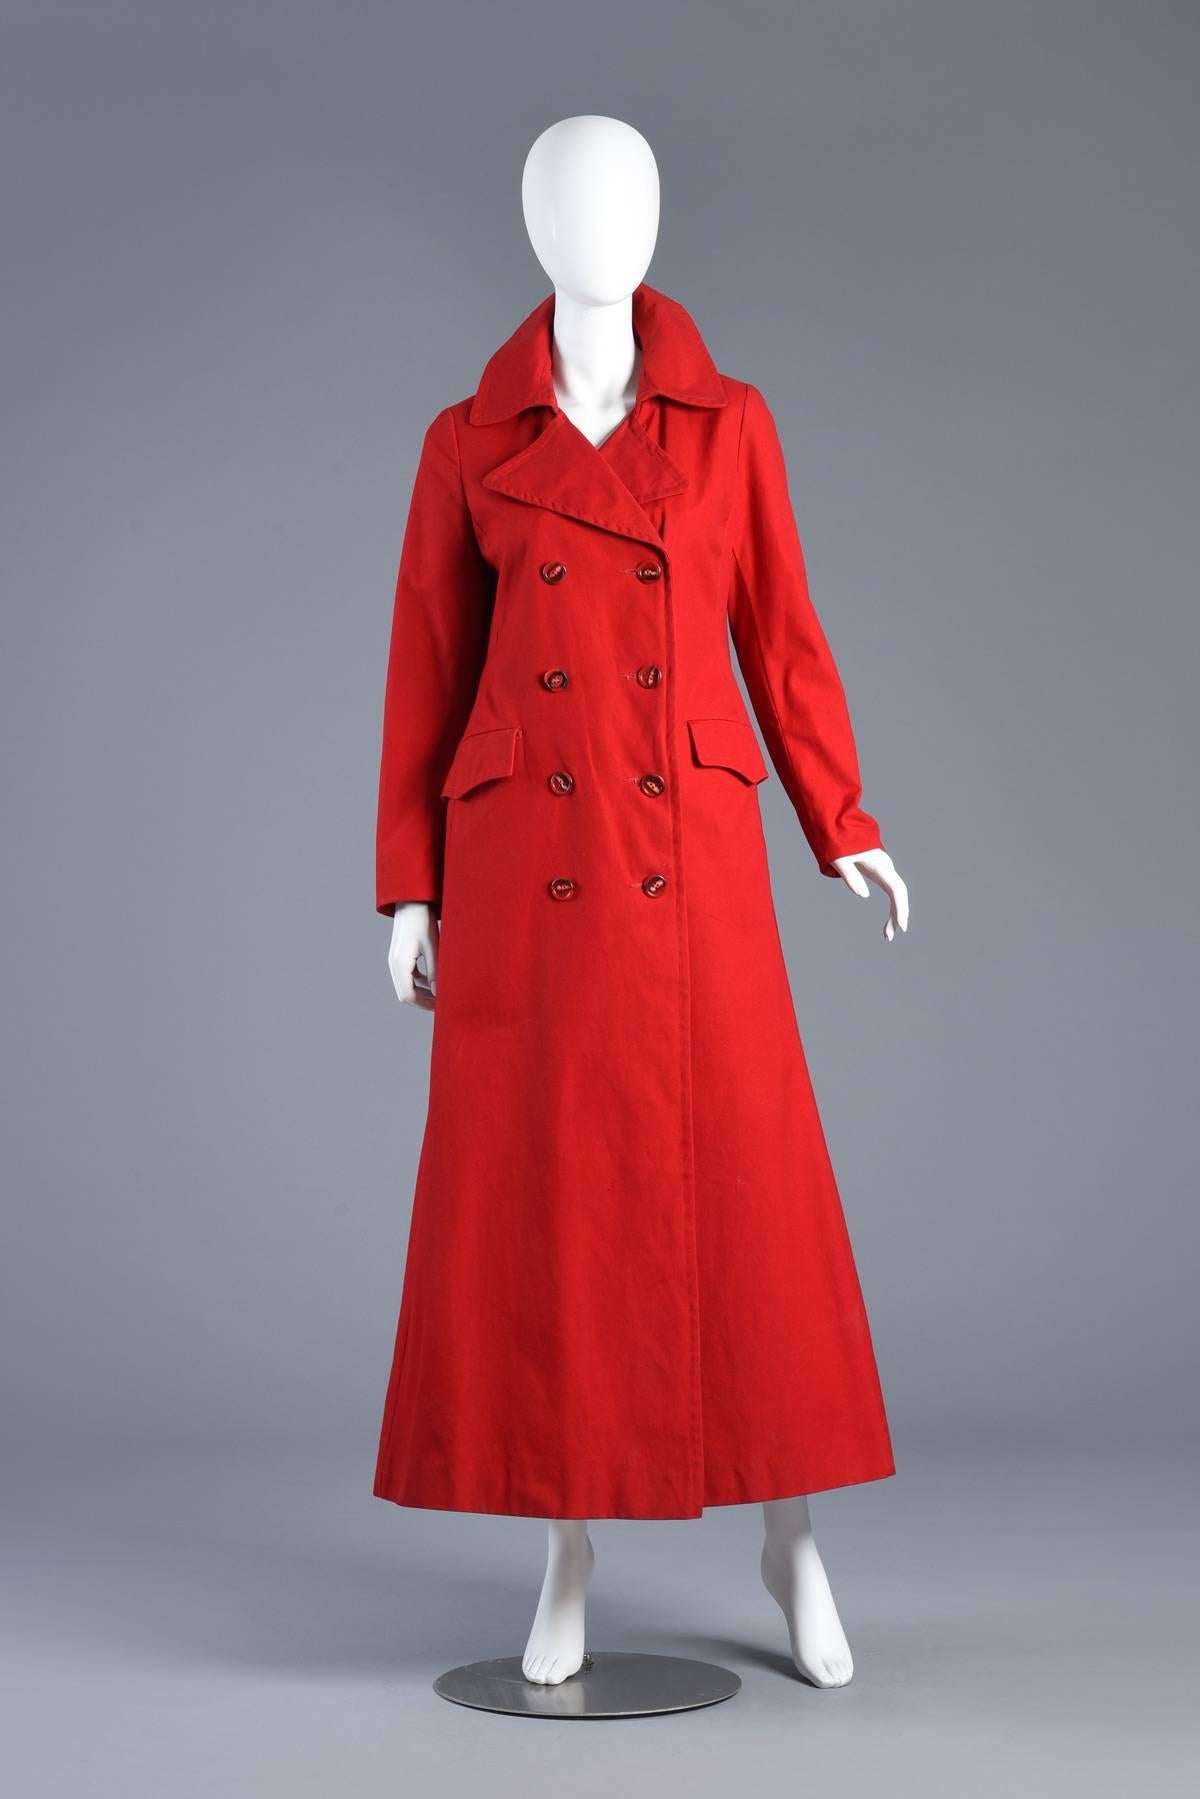 Amazing vintage 1970s floor length cotton trench coat / mac. Rare vibrant red! Double breasted button front. Tabbed pockets. Incredible oversized collar. Slightly nipped waist with super full bottom. Very high quality construction. Excellent vintage